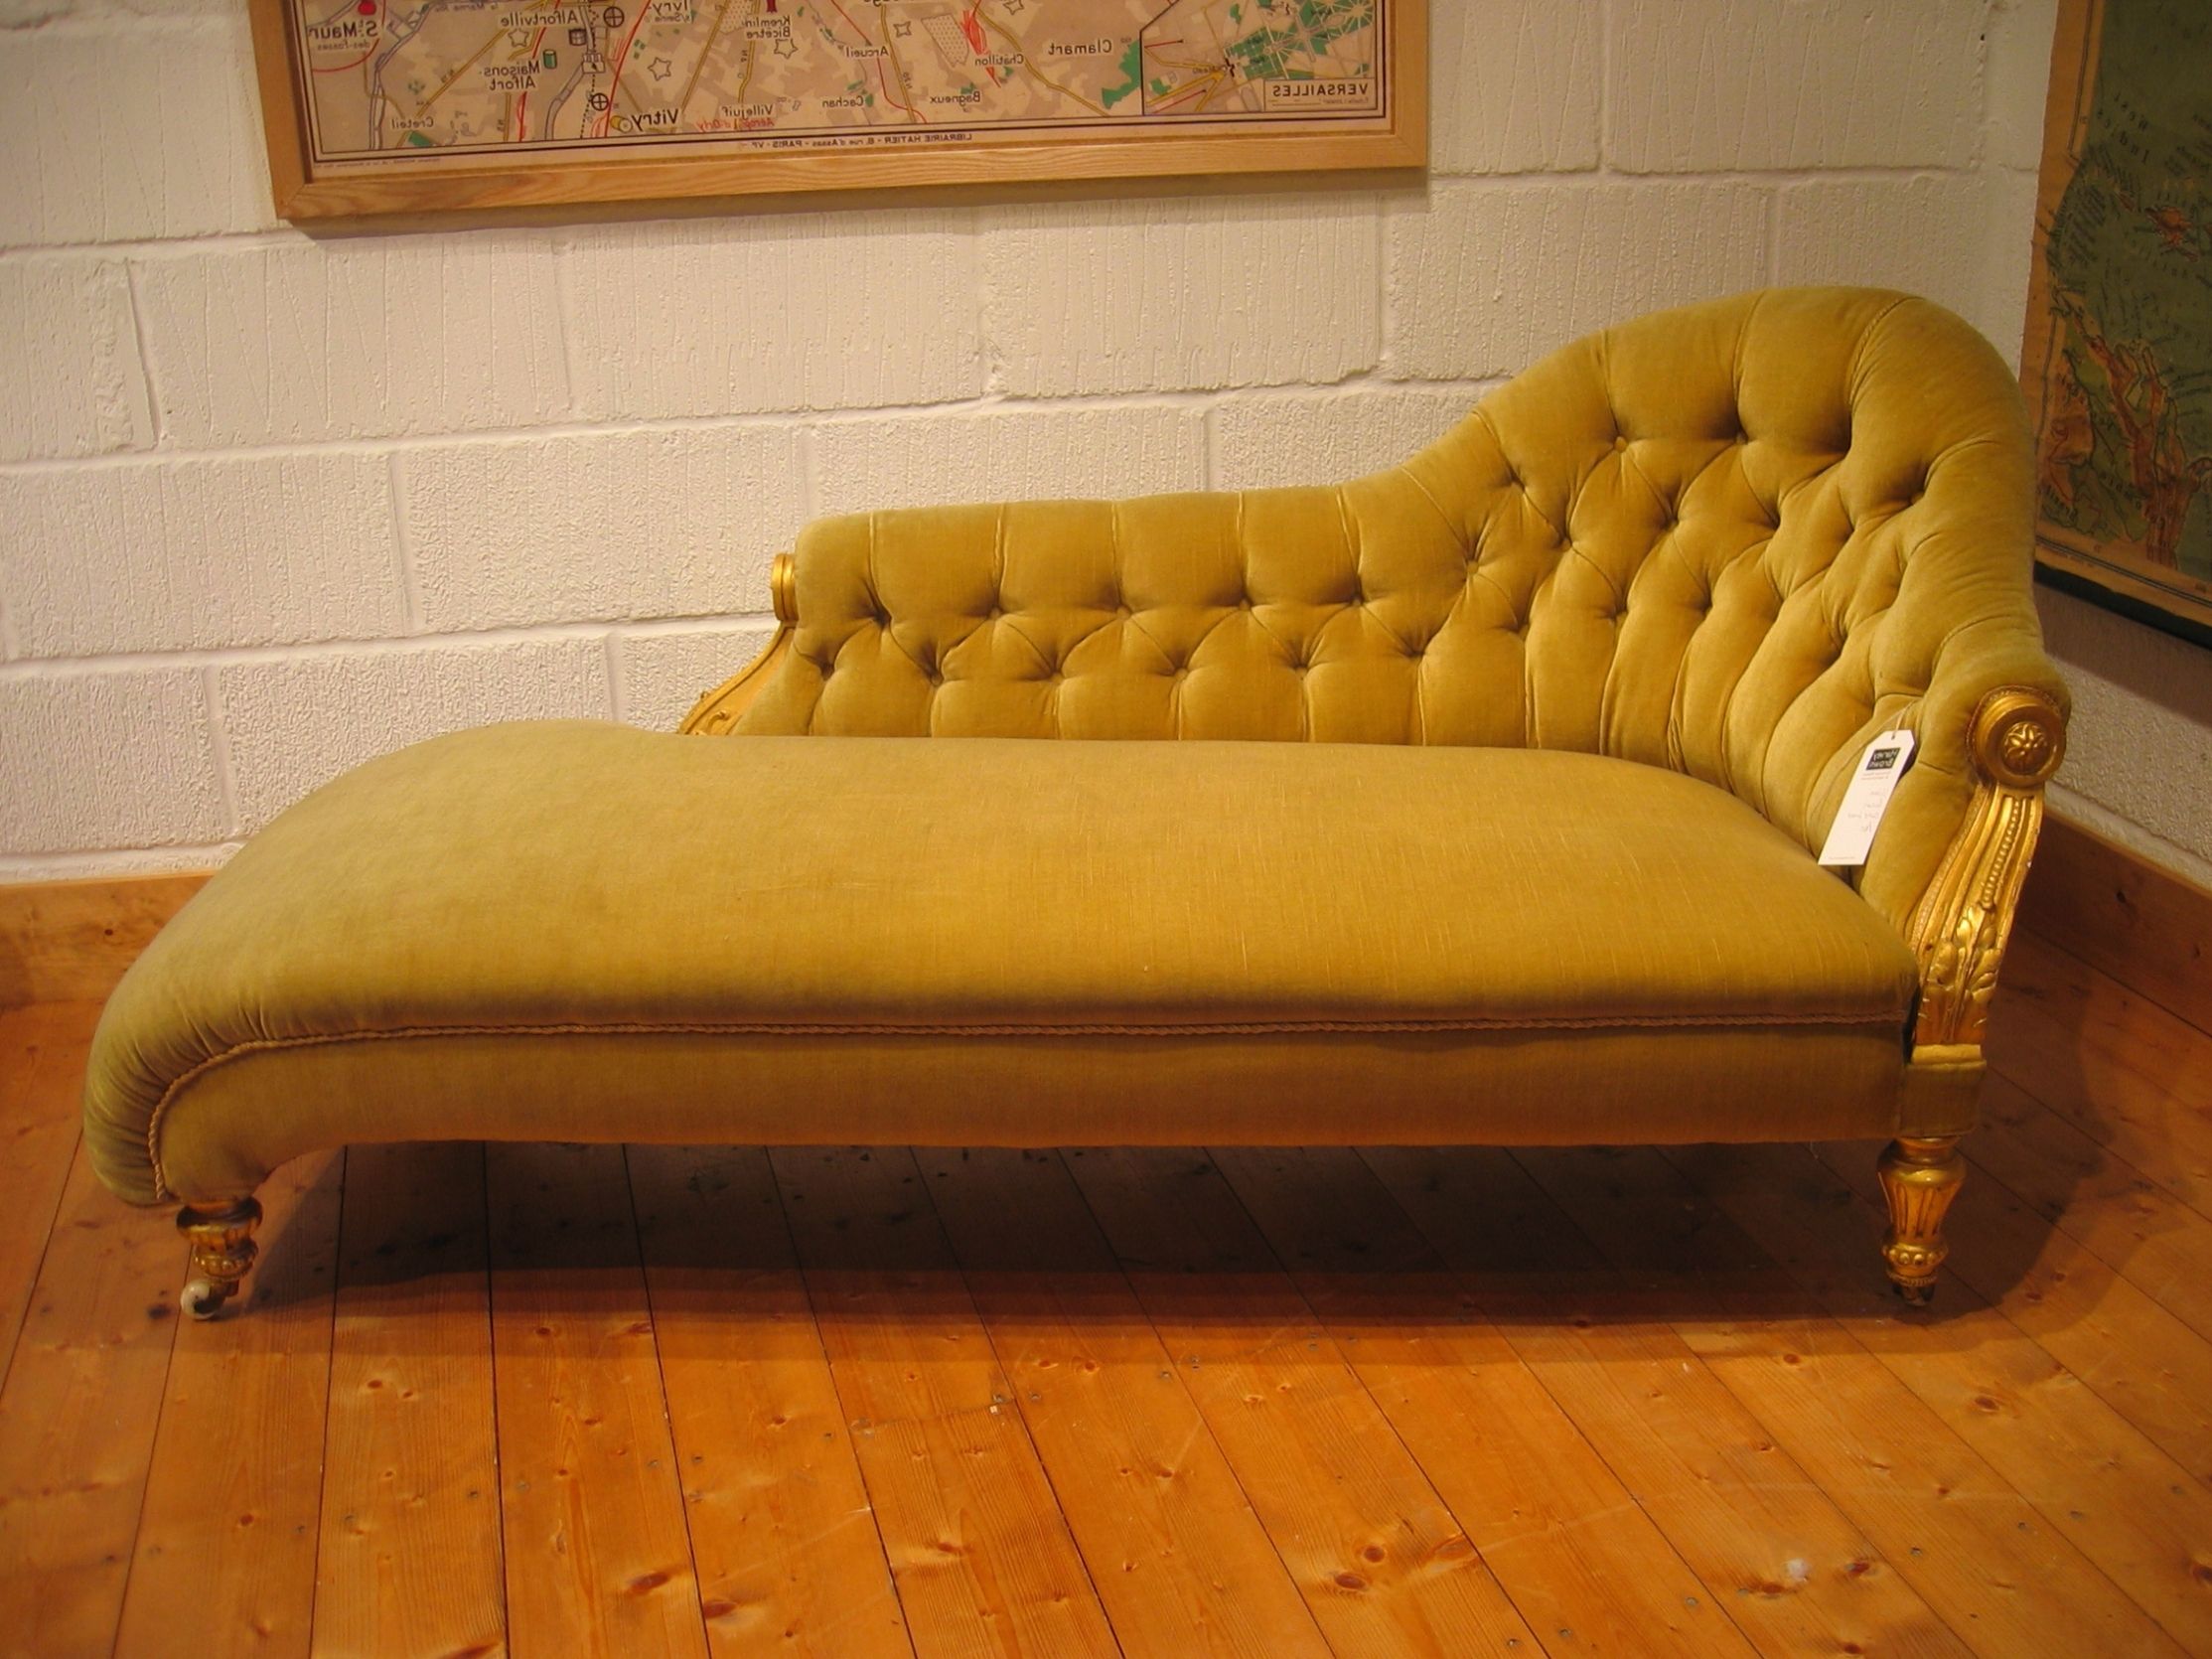 Victorian Chaise Lounge Chairs For Most Up To Date Home Decor: Yellow Color Antique Victorian Chaise Lounge Sofa Bed (View 11 of 15)